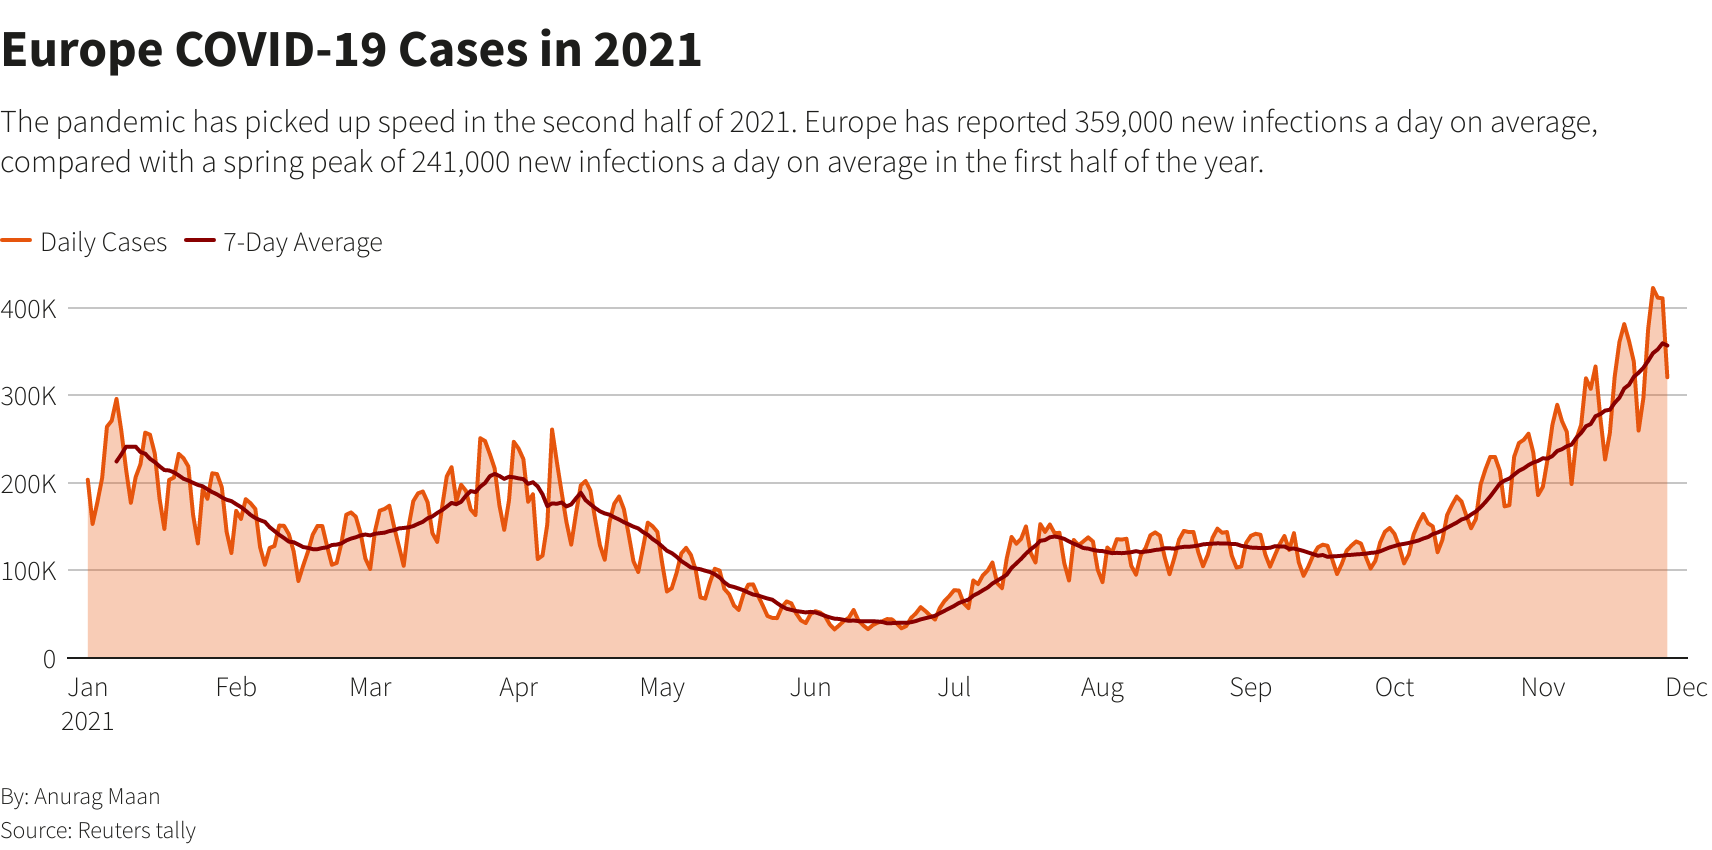 Europe COVID-19 Cases in 2021